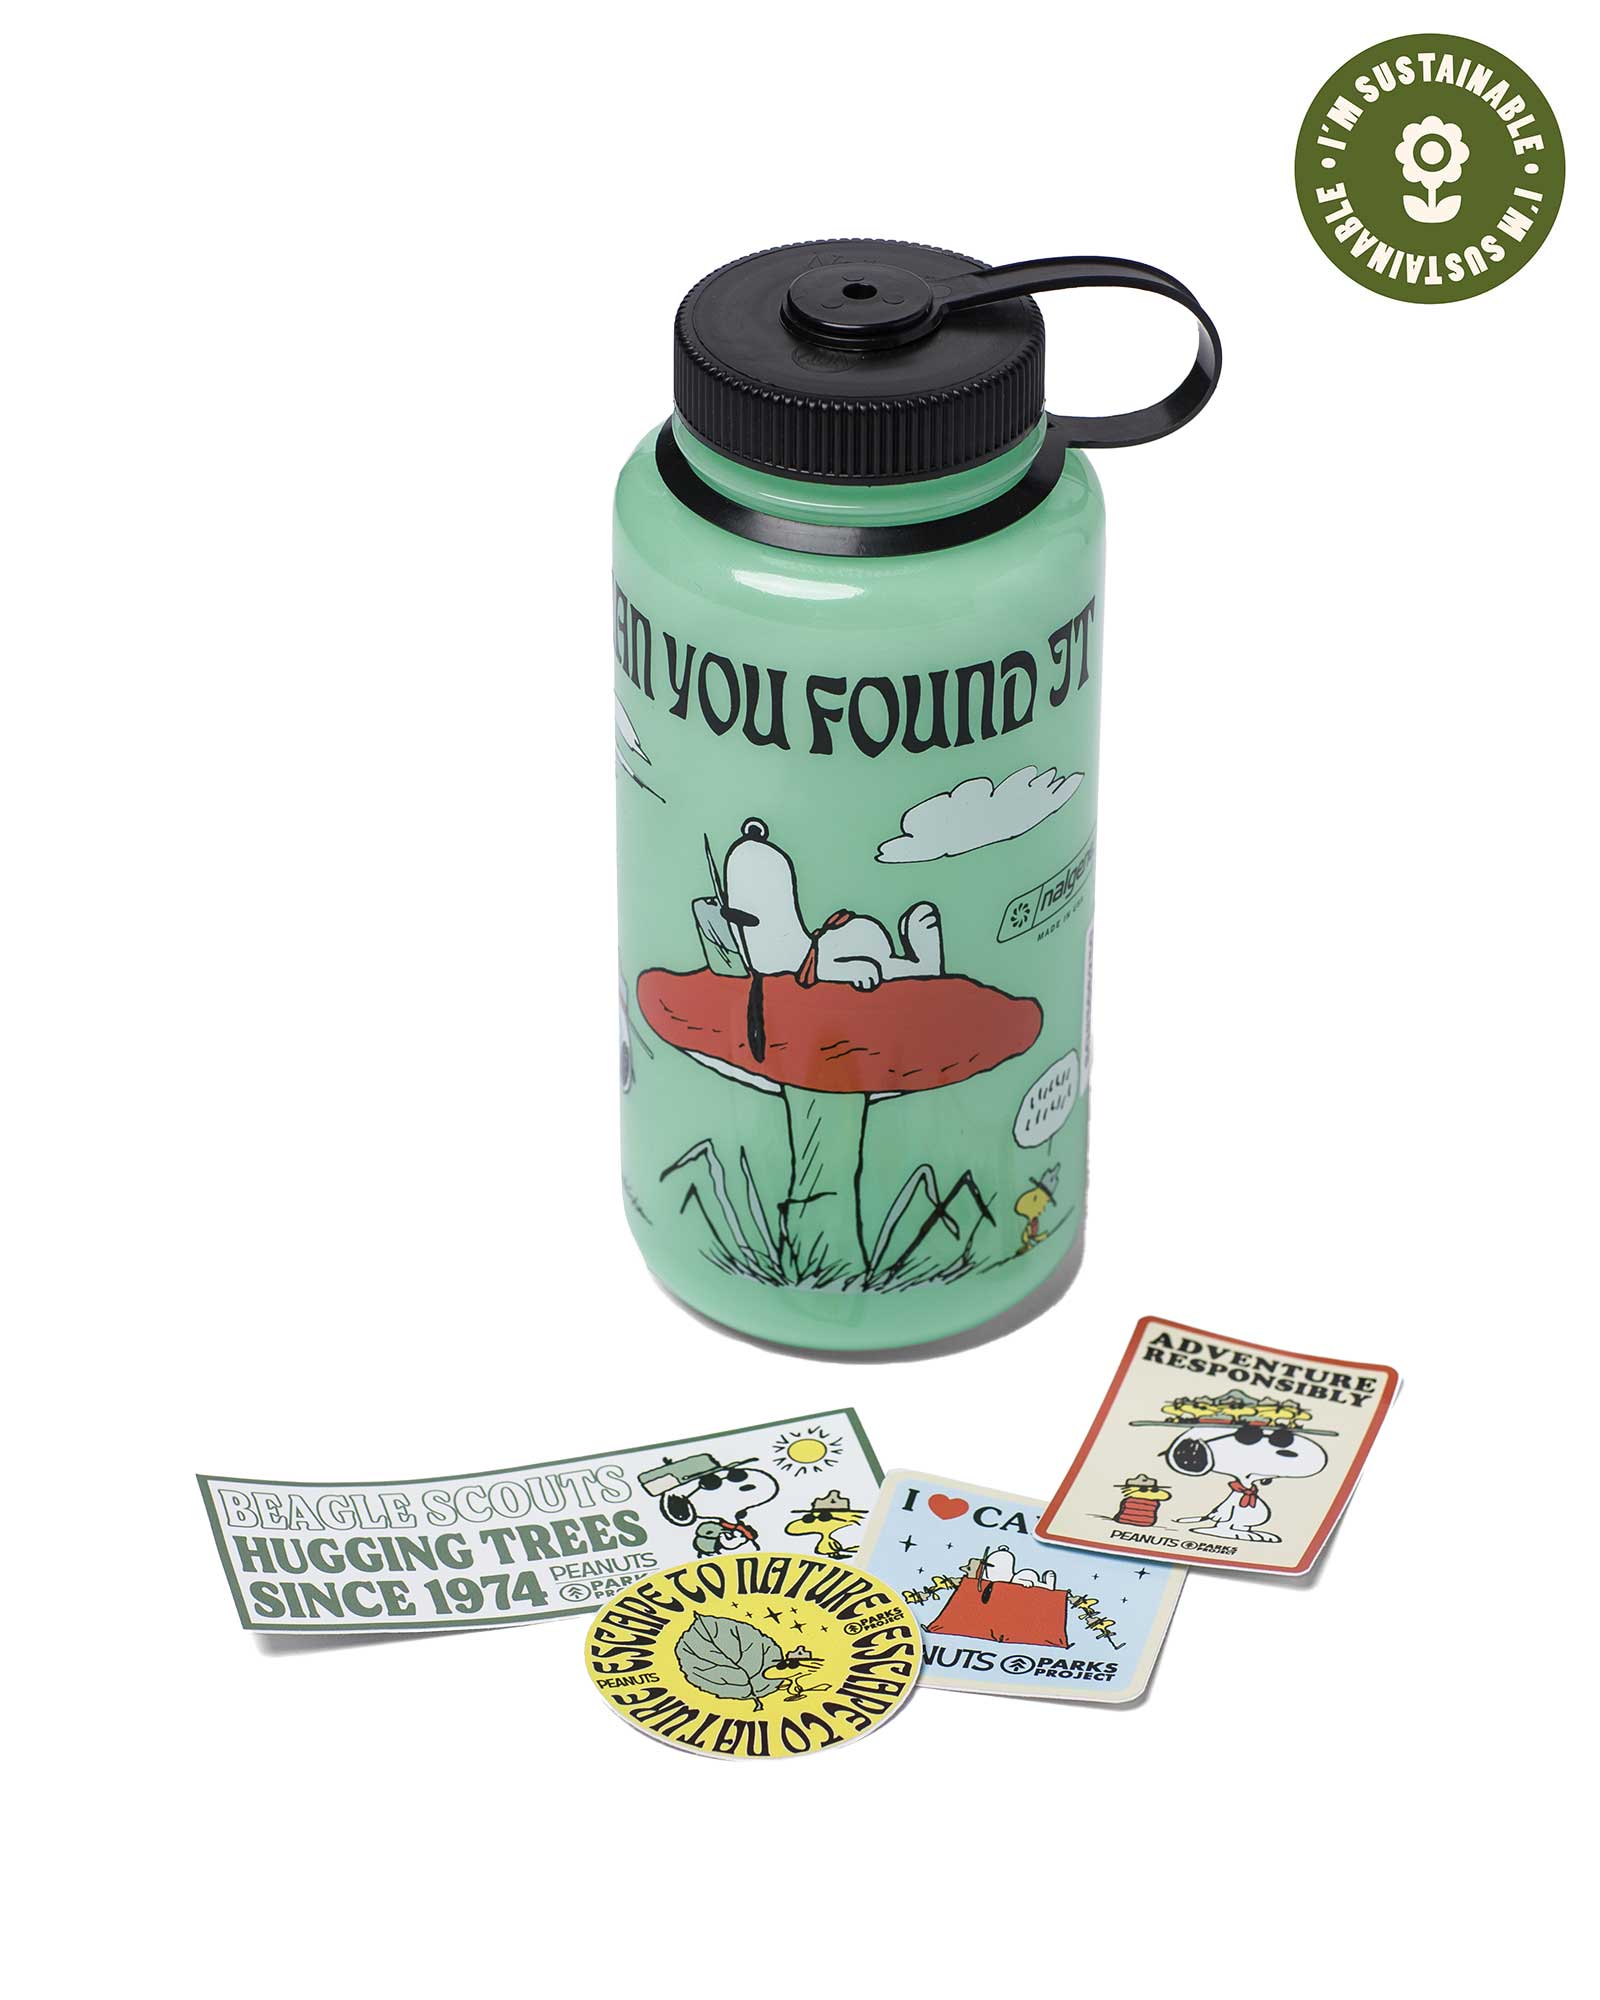 Peanuts x Parks Project: Snoopy Themed Water Bottle and Sticker Pack